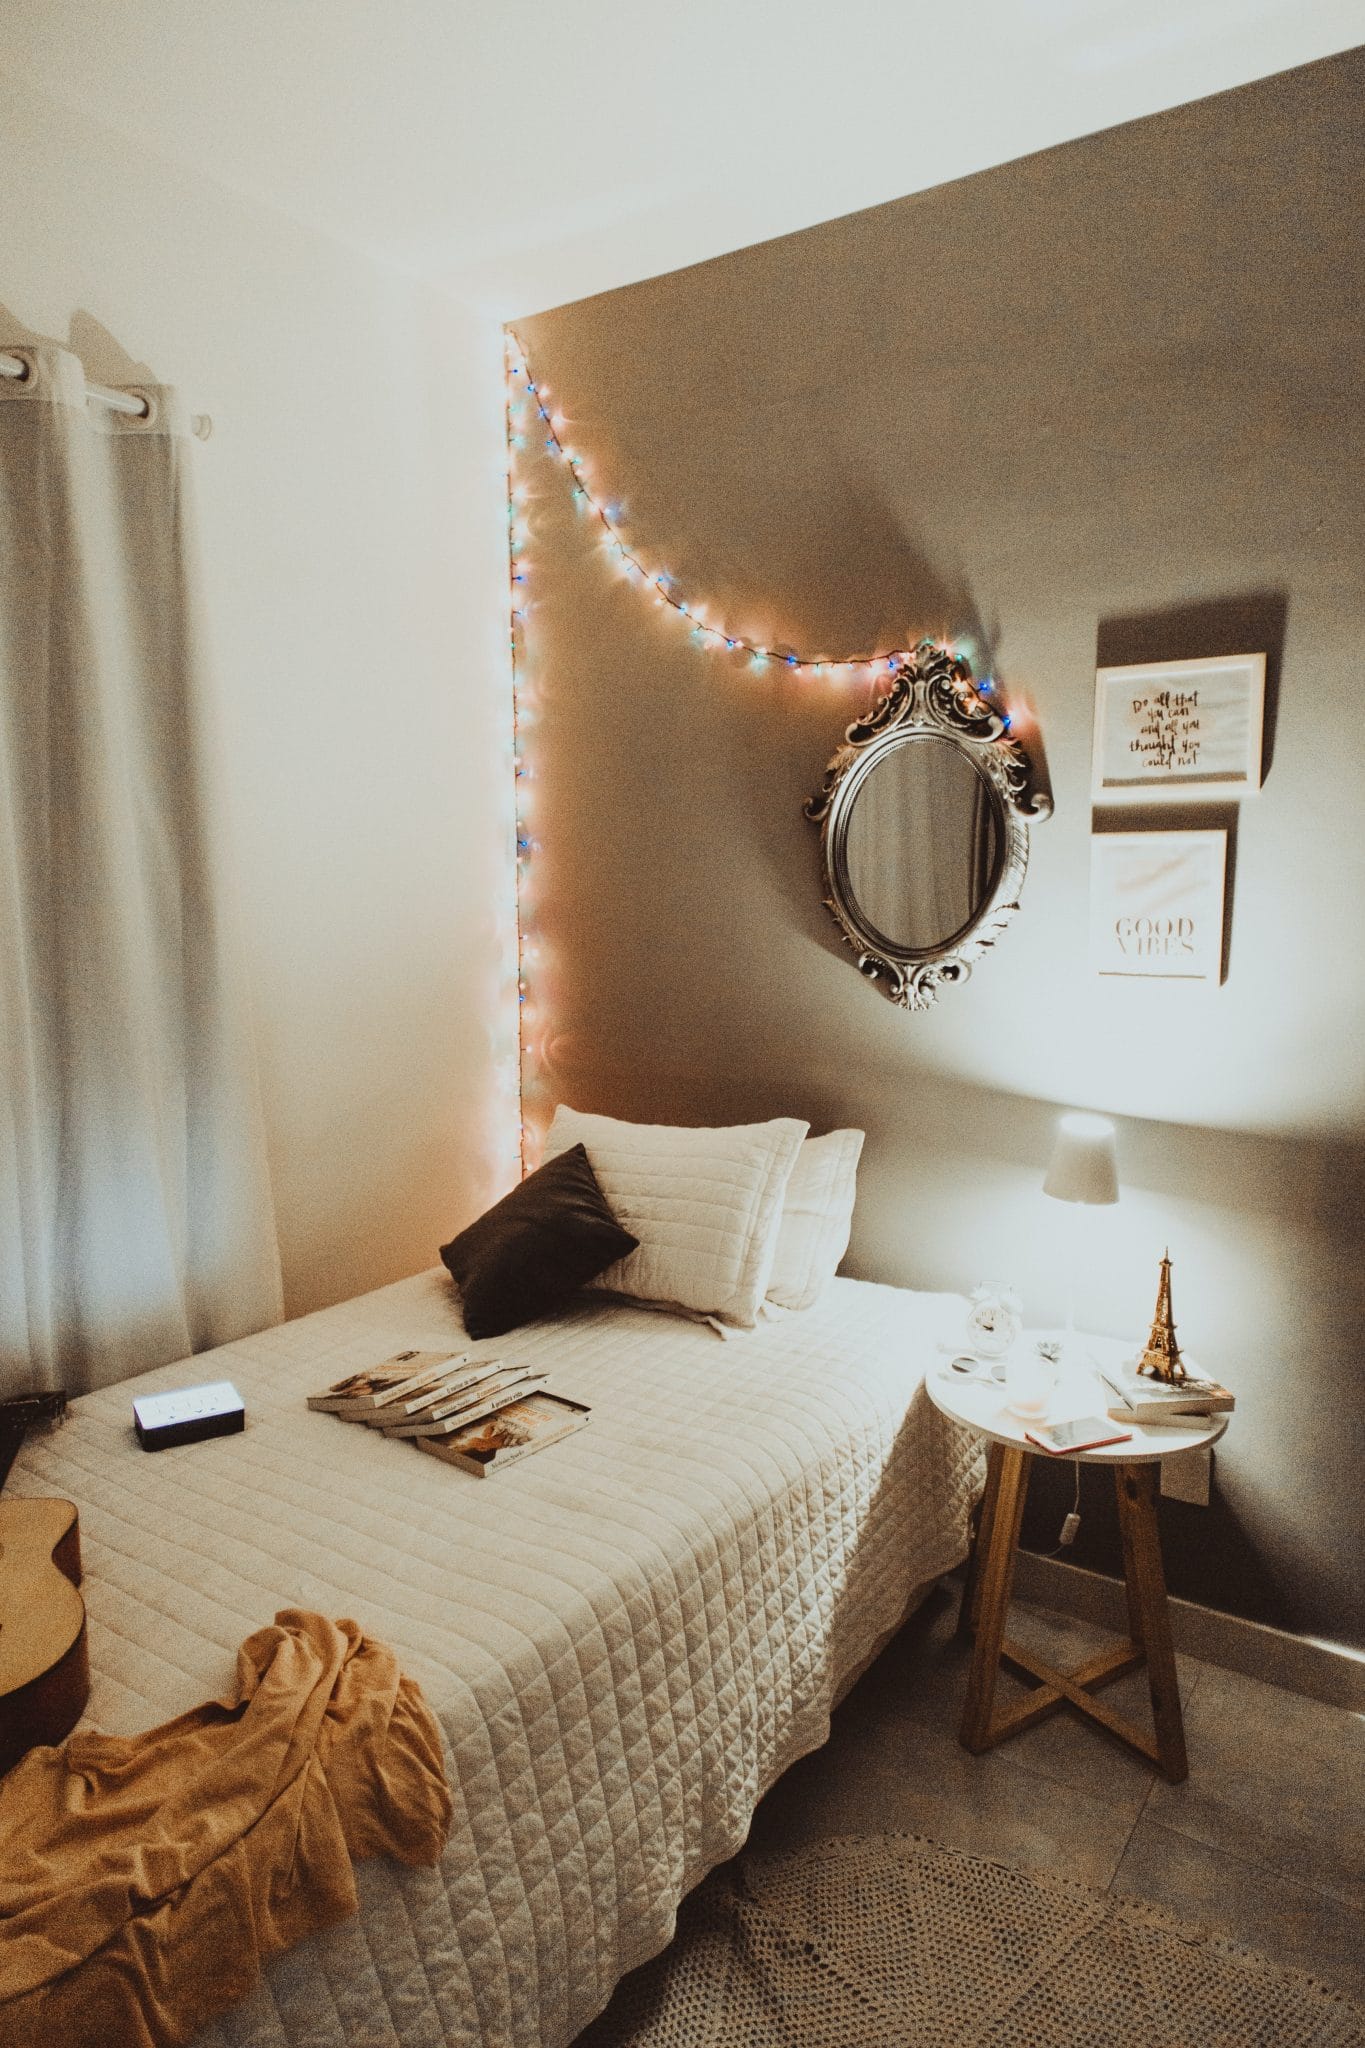 Easy, Fun, and Cheap Ways to Decorate Your Dorm Room - Girl Spring